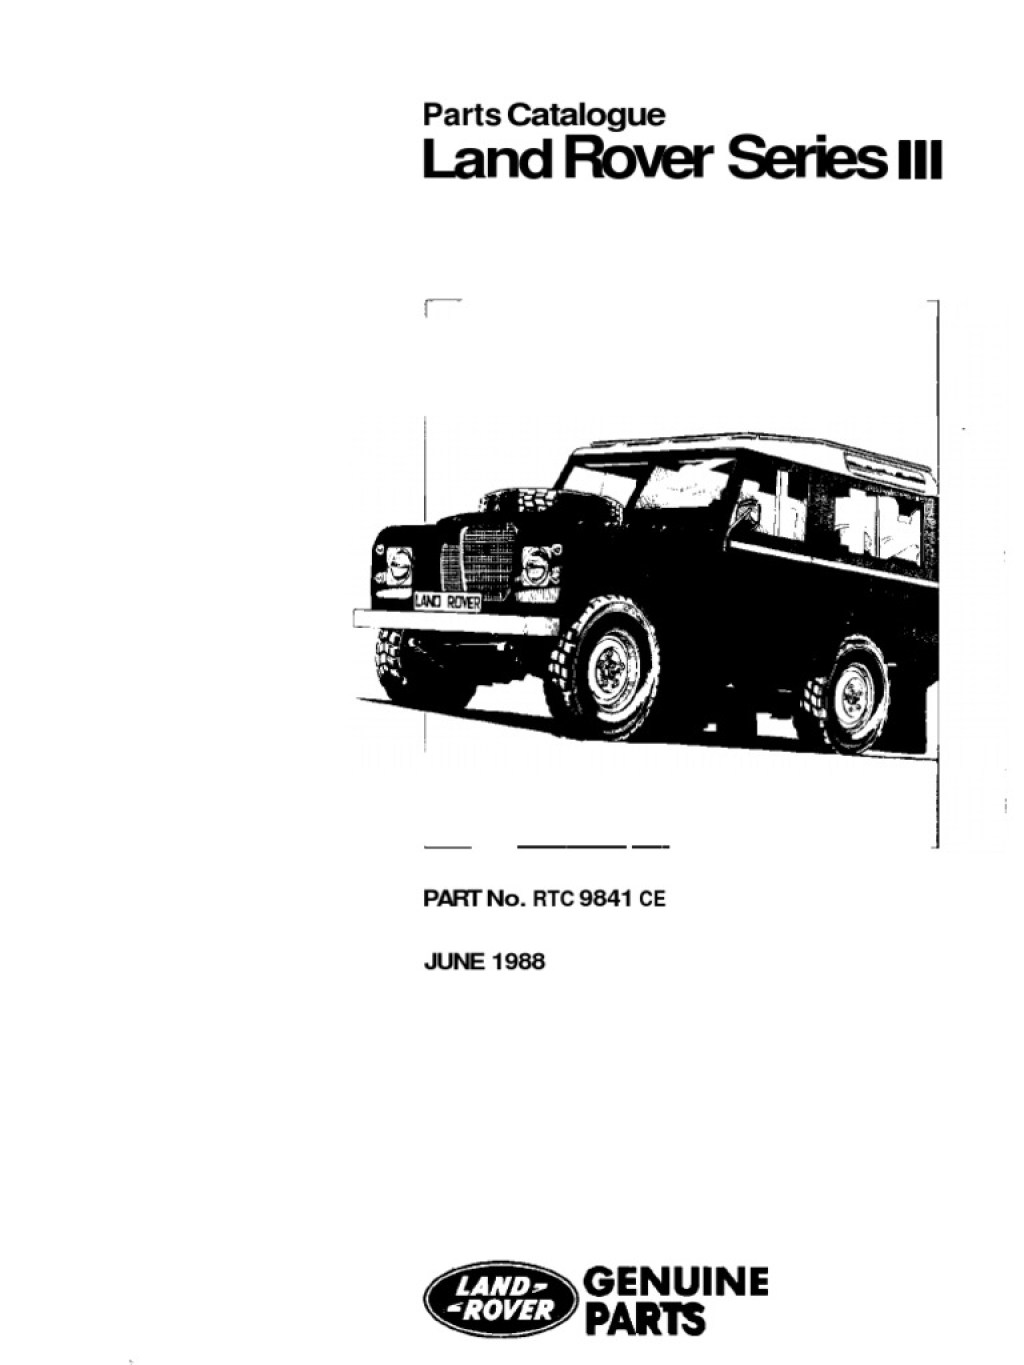 Picture of: Series  Parts List  PDF  Transportation Engineering  Vehicle Parts